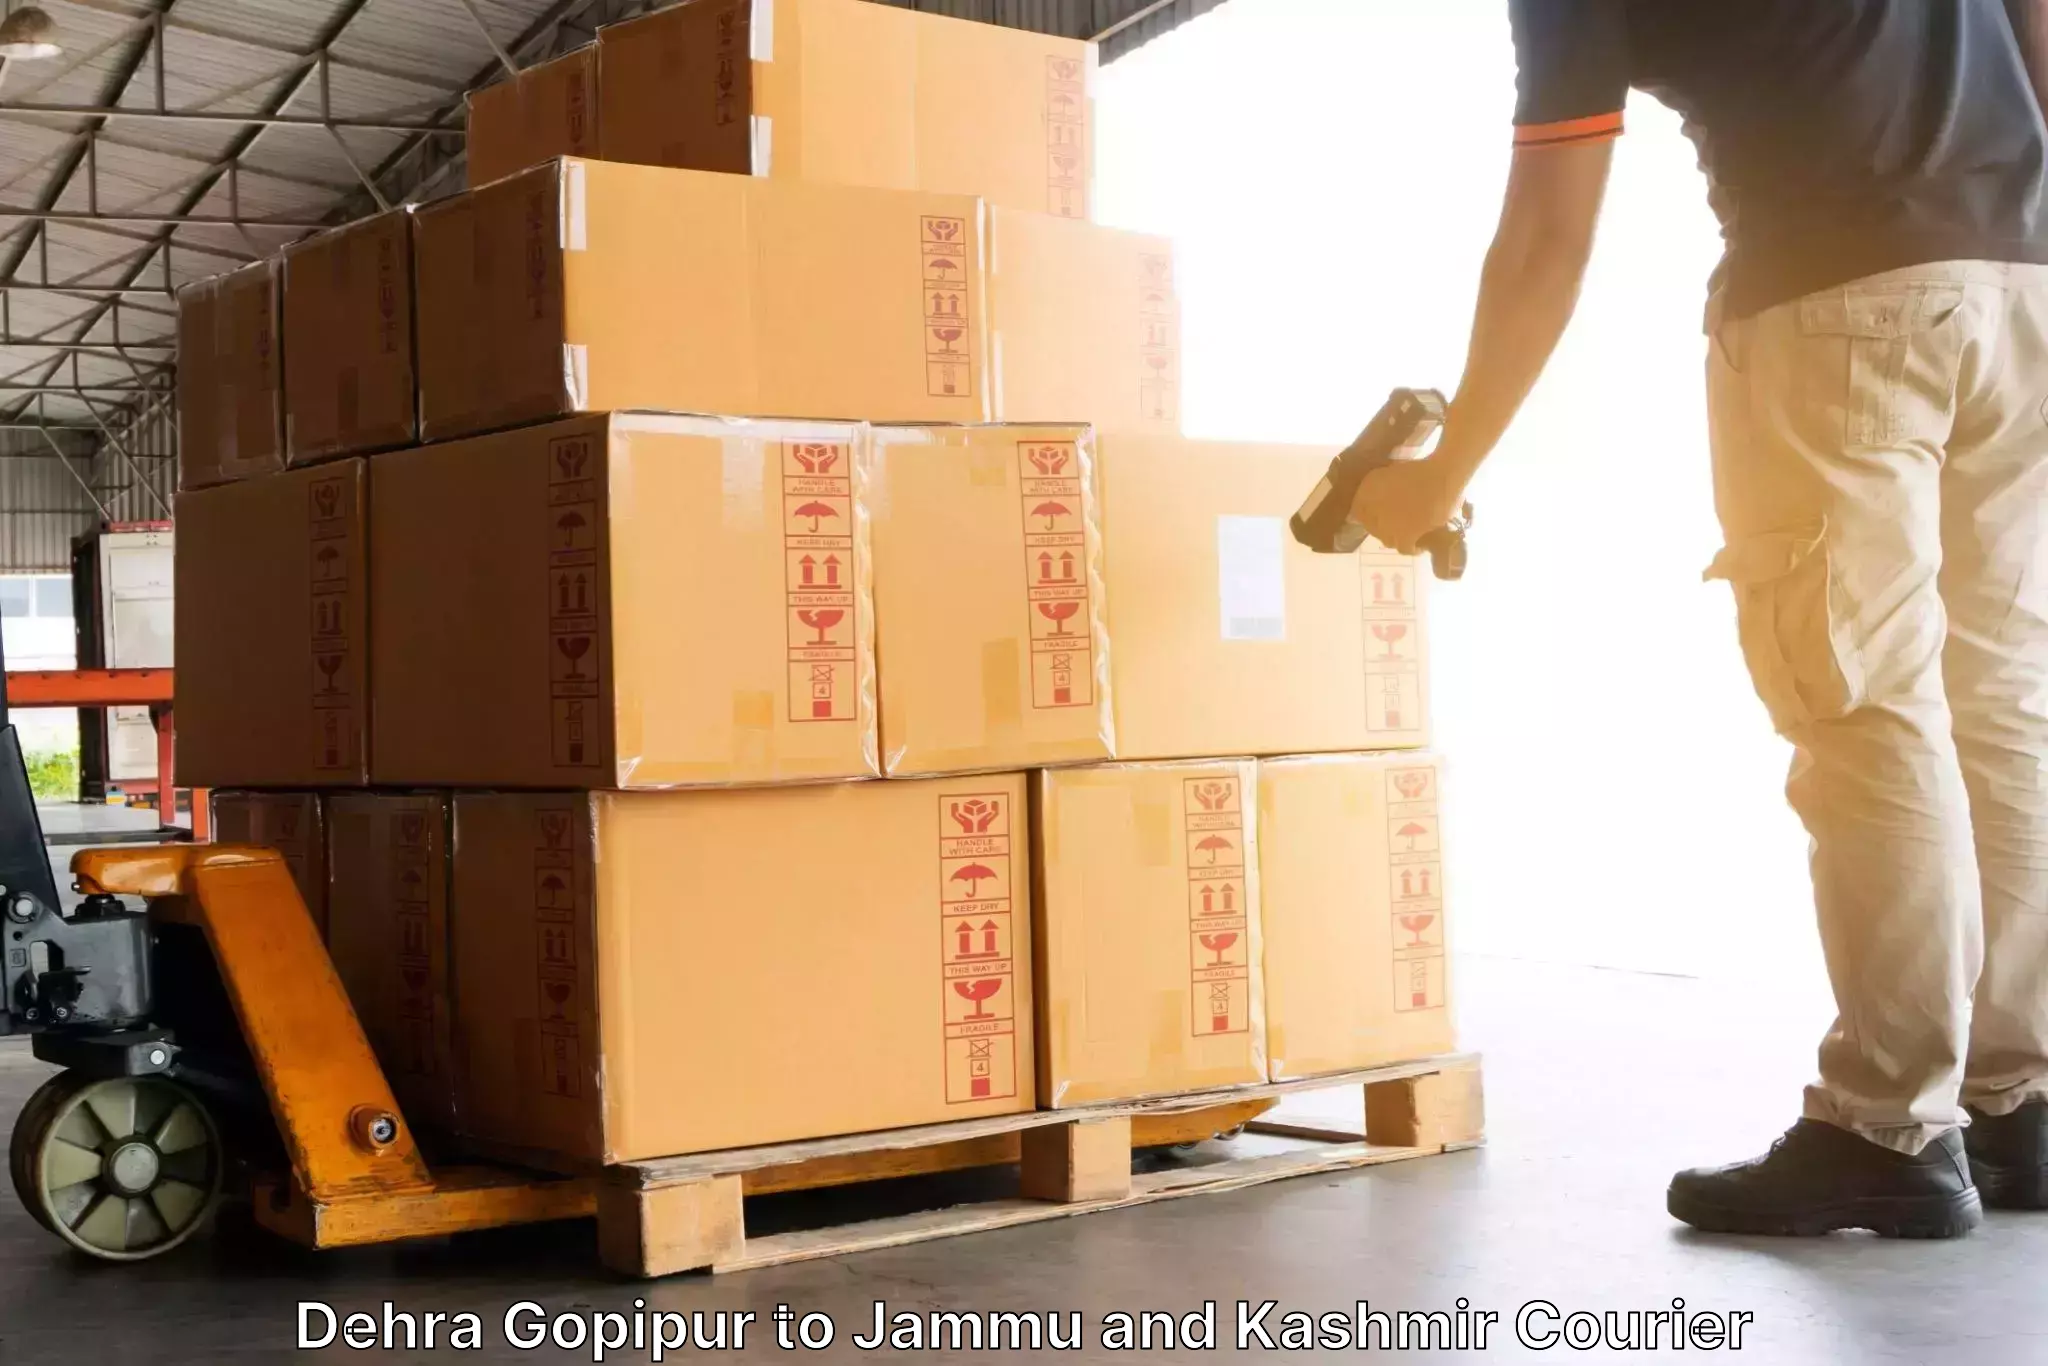 Reliable courier services Dehra Gopipur to Leh